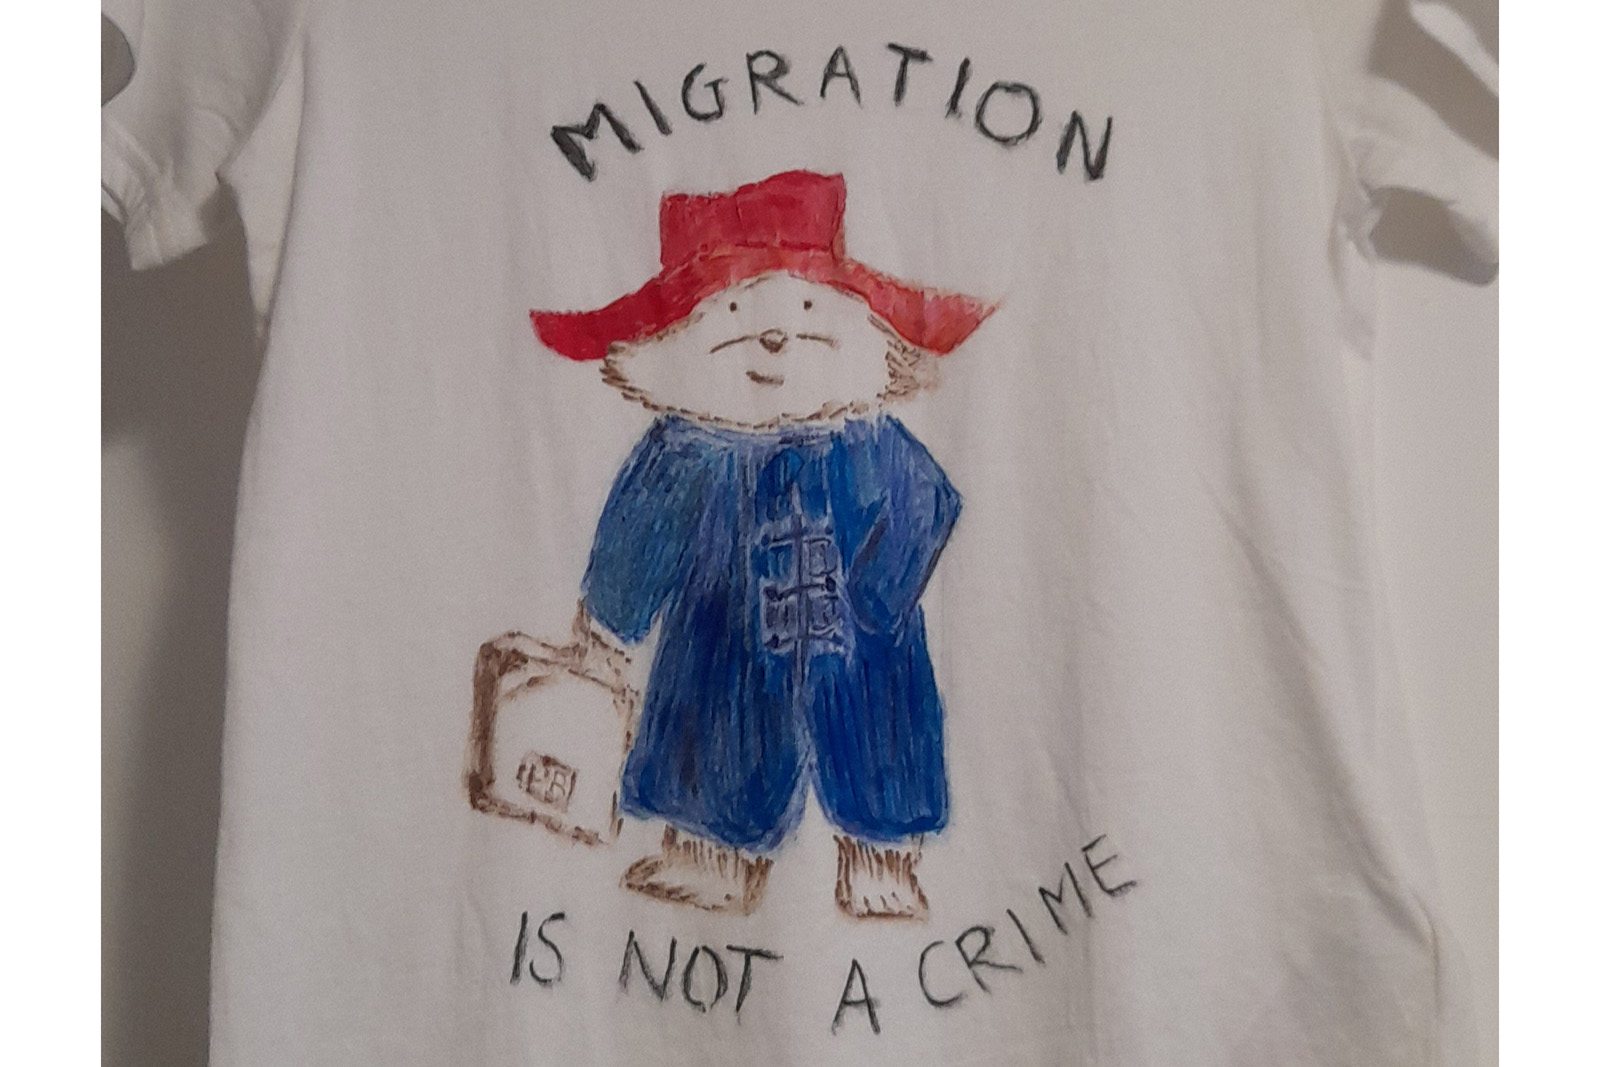 Drawing of a bear in a red hat and blue overalls carrying a suitcase on a t-shirt with "migration is not a crime" surrounding the picture